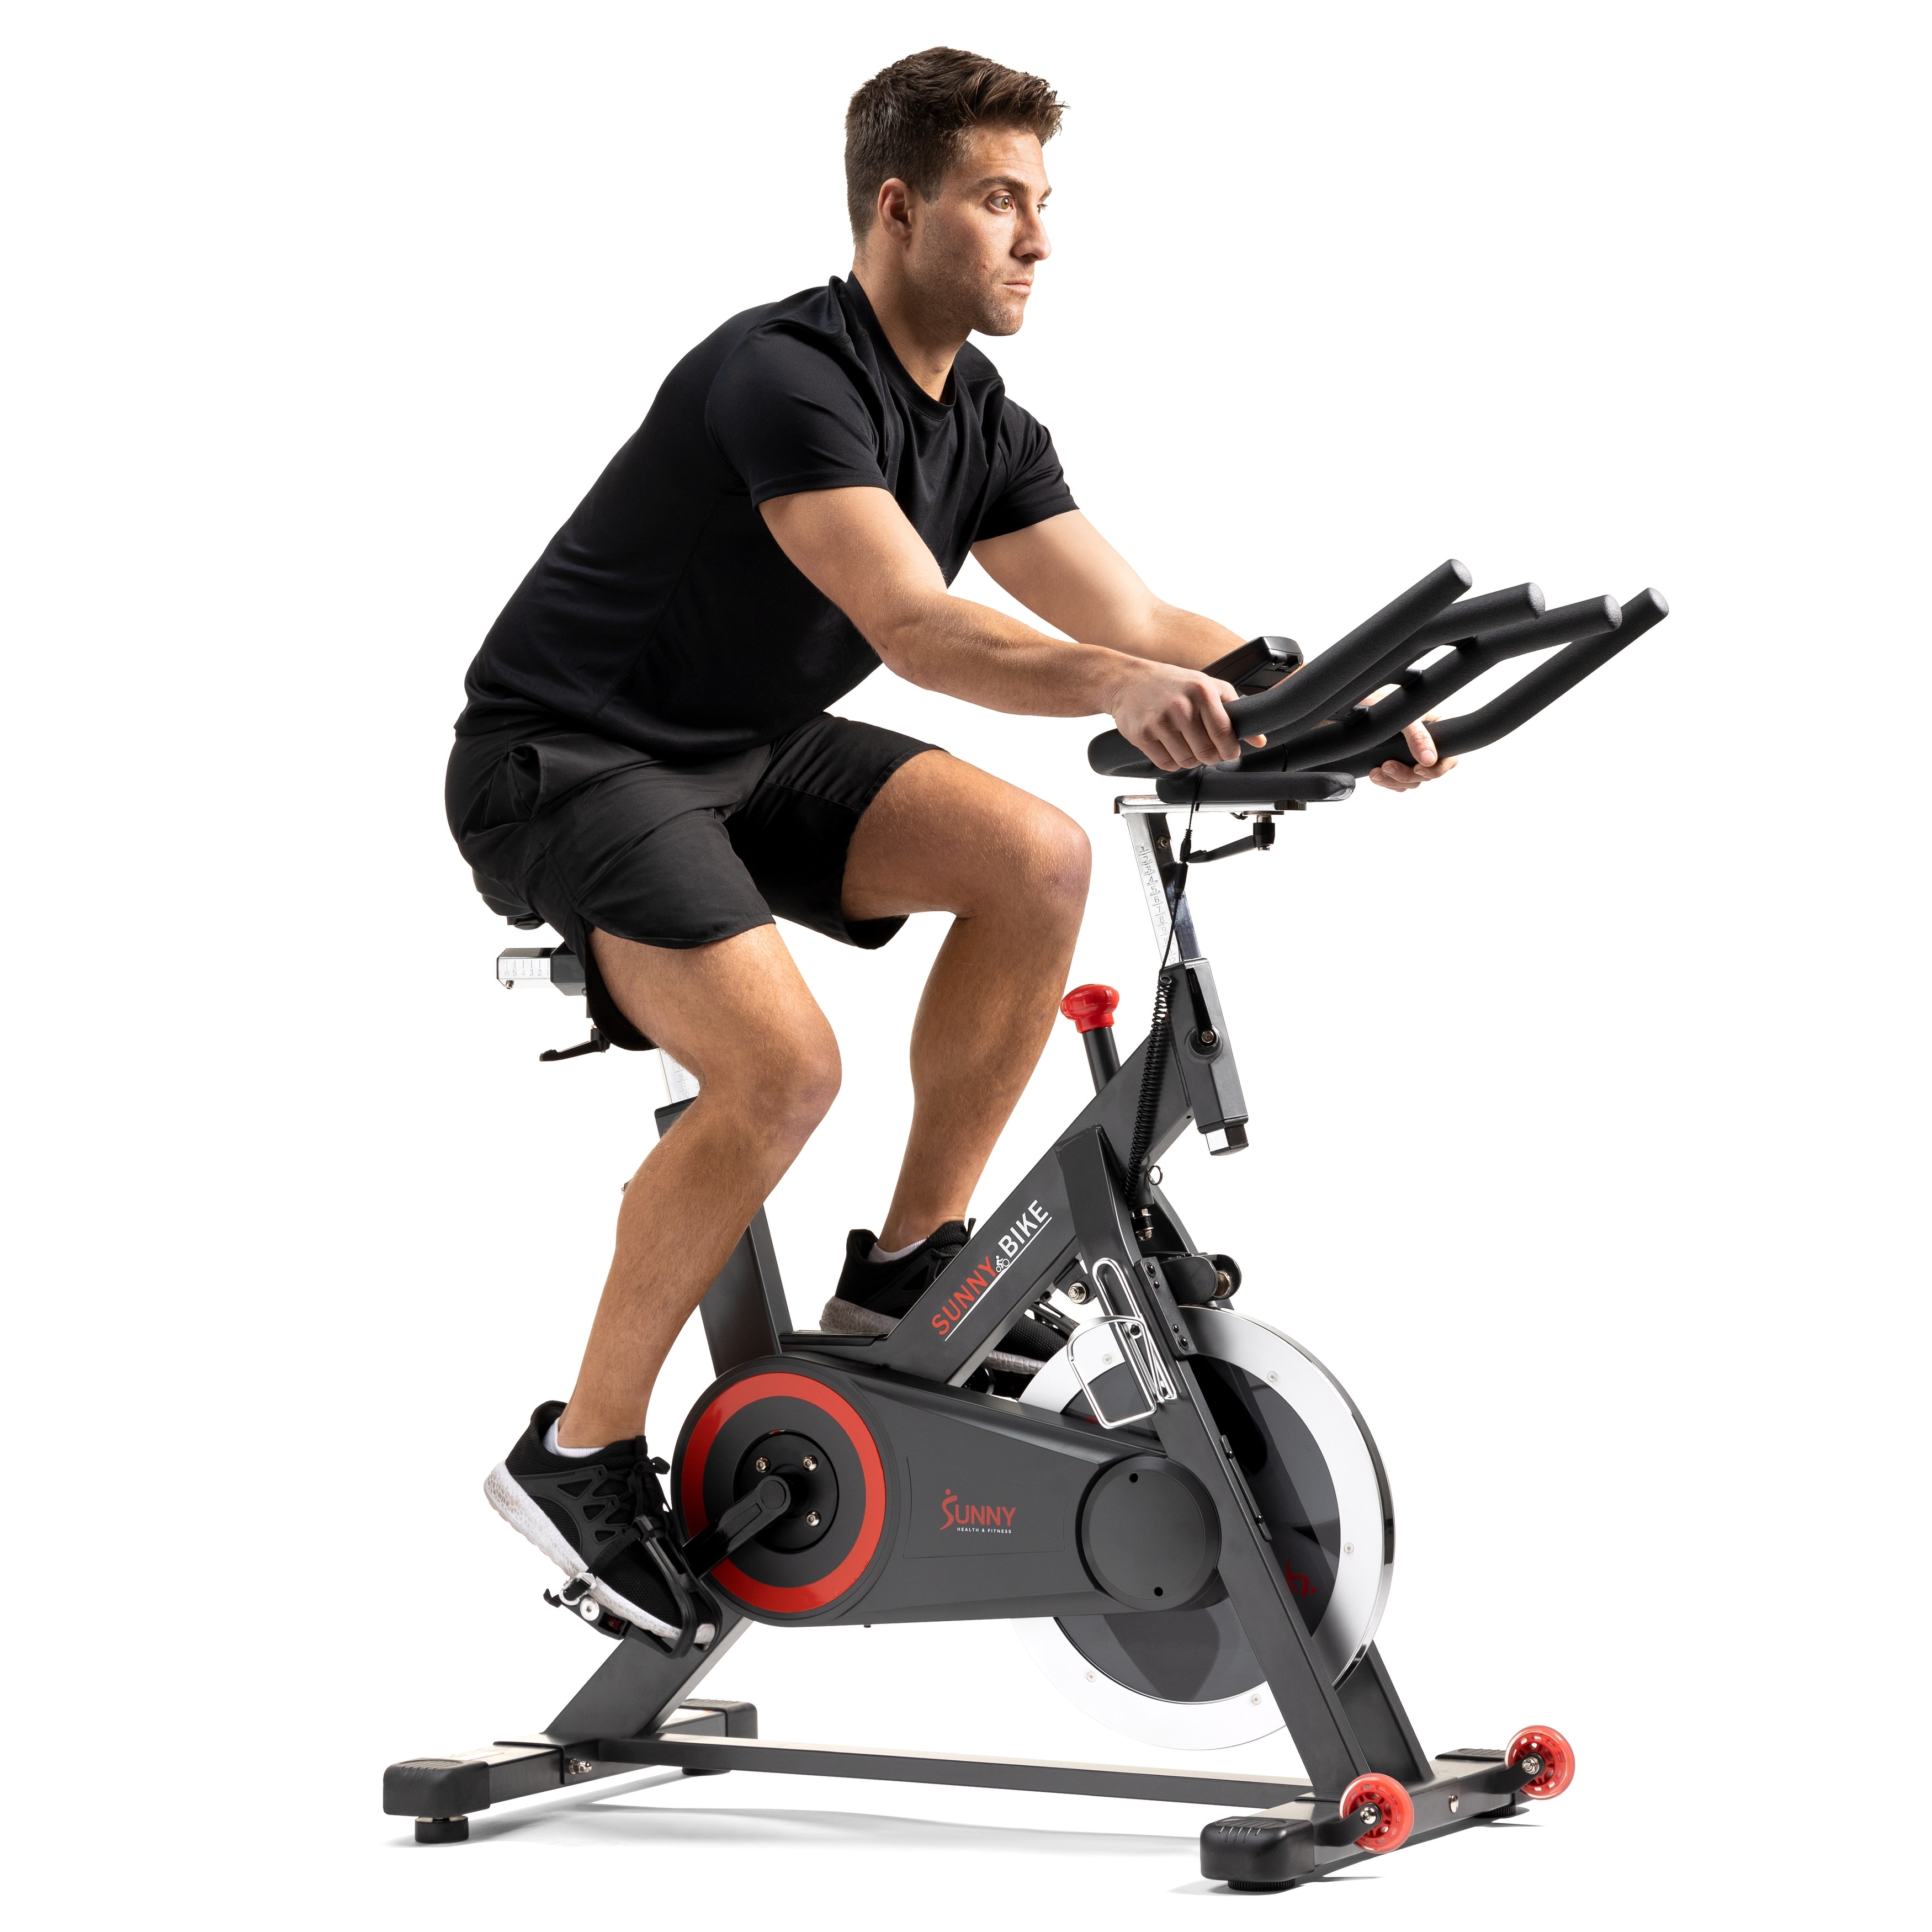 https://ak1.ostkcdn.com/images/products/is/images/direct/a48310d340b74f4537916ad05cb4dd33c96613f3/Sunny-Health-%26-Fitness-Premium-Indoor-Cycle-Bike%2C-Exclusive-SunnyFit-App.jpg